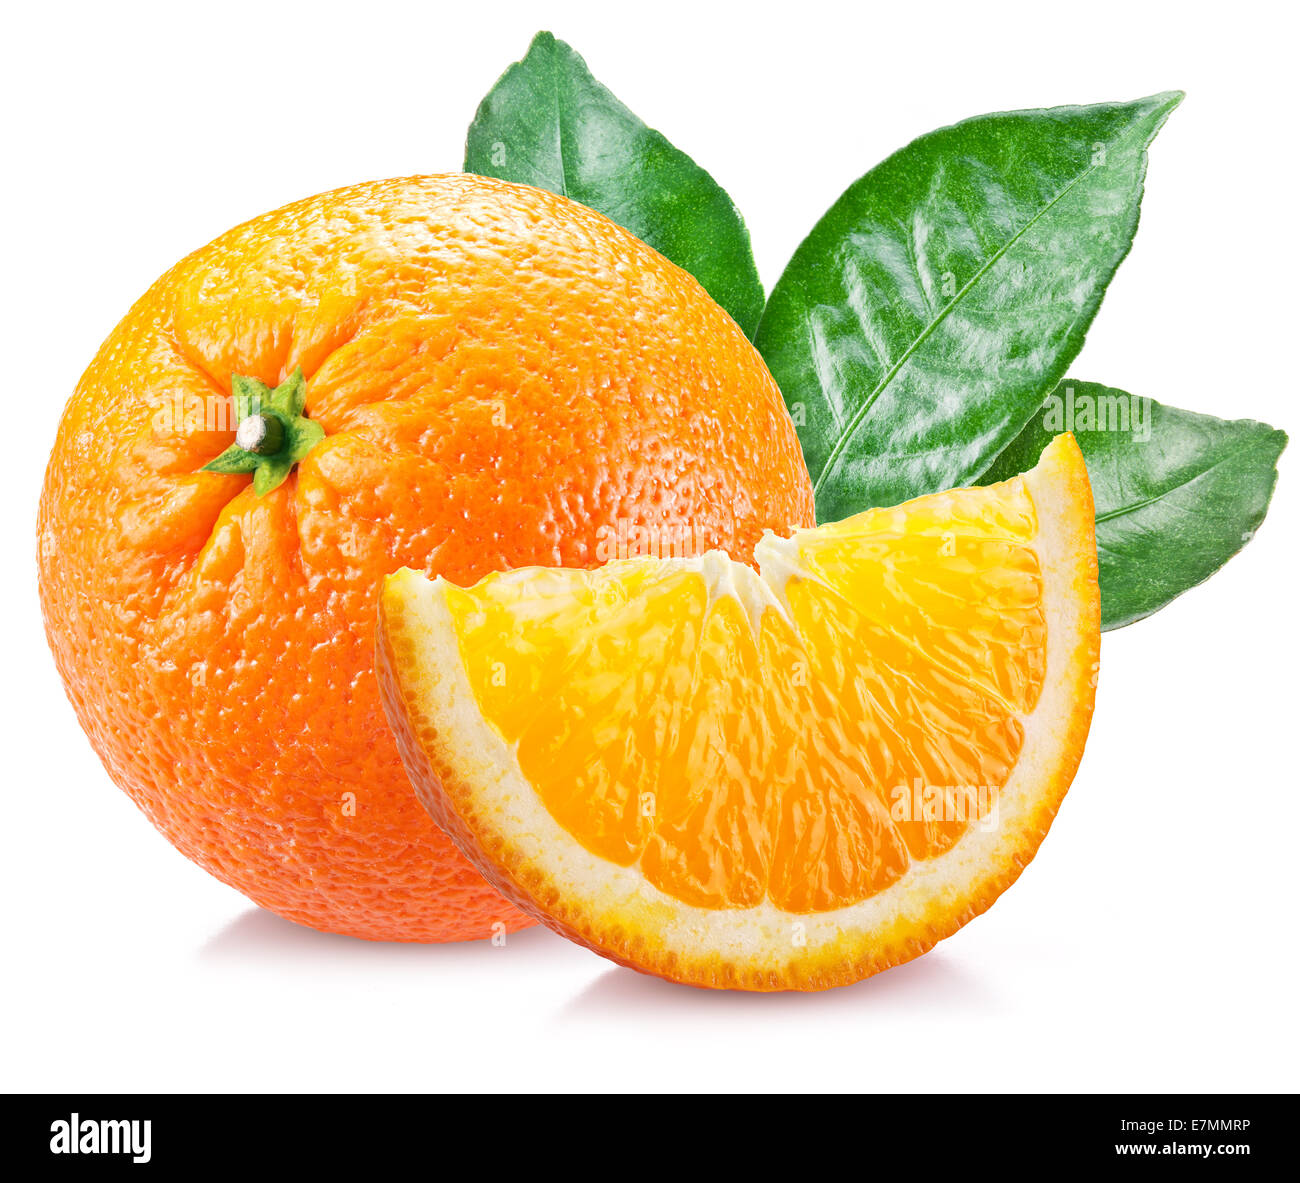 Orange with leaves over white background. Stock Photo